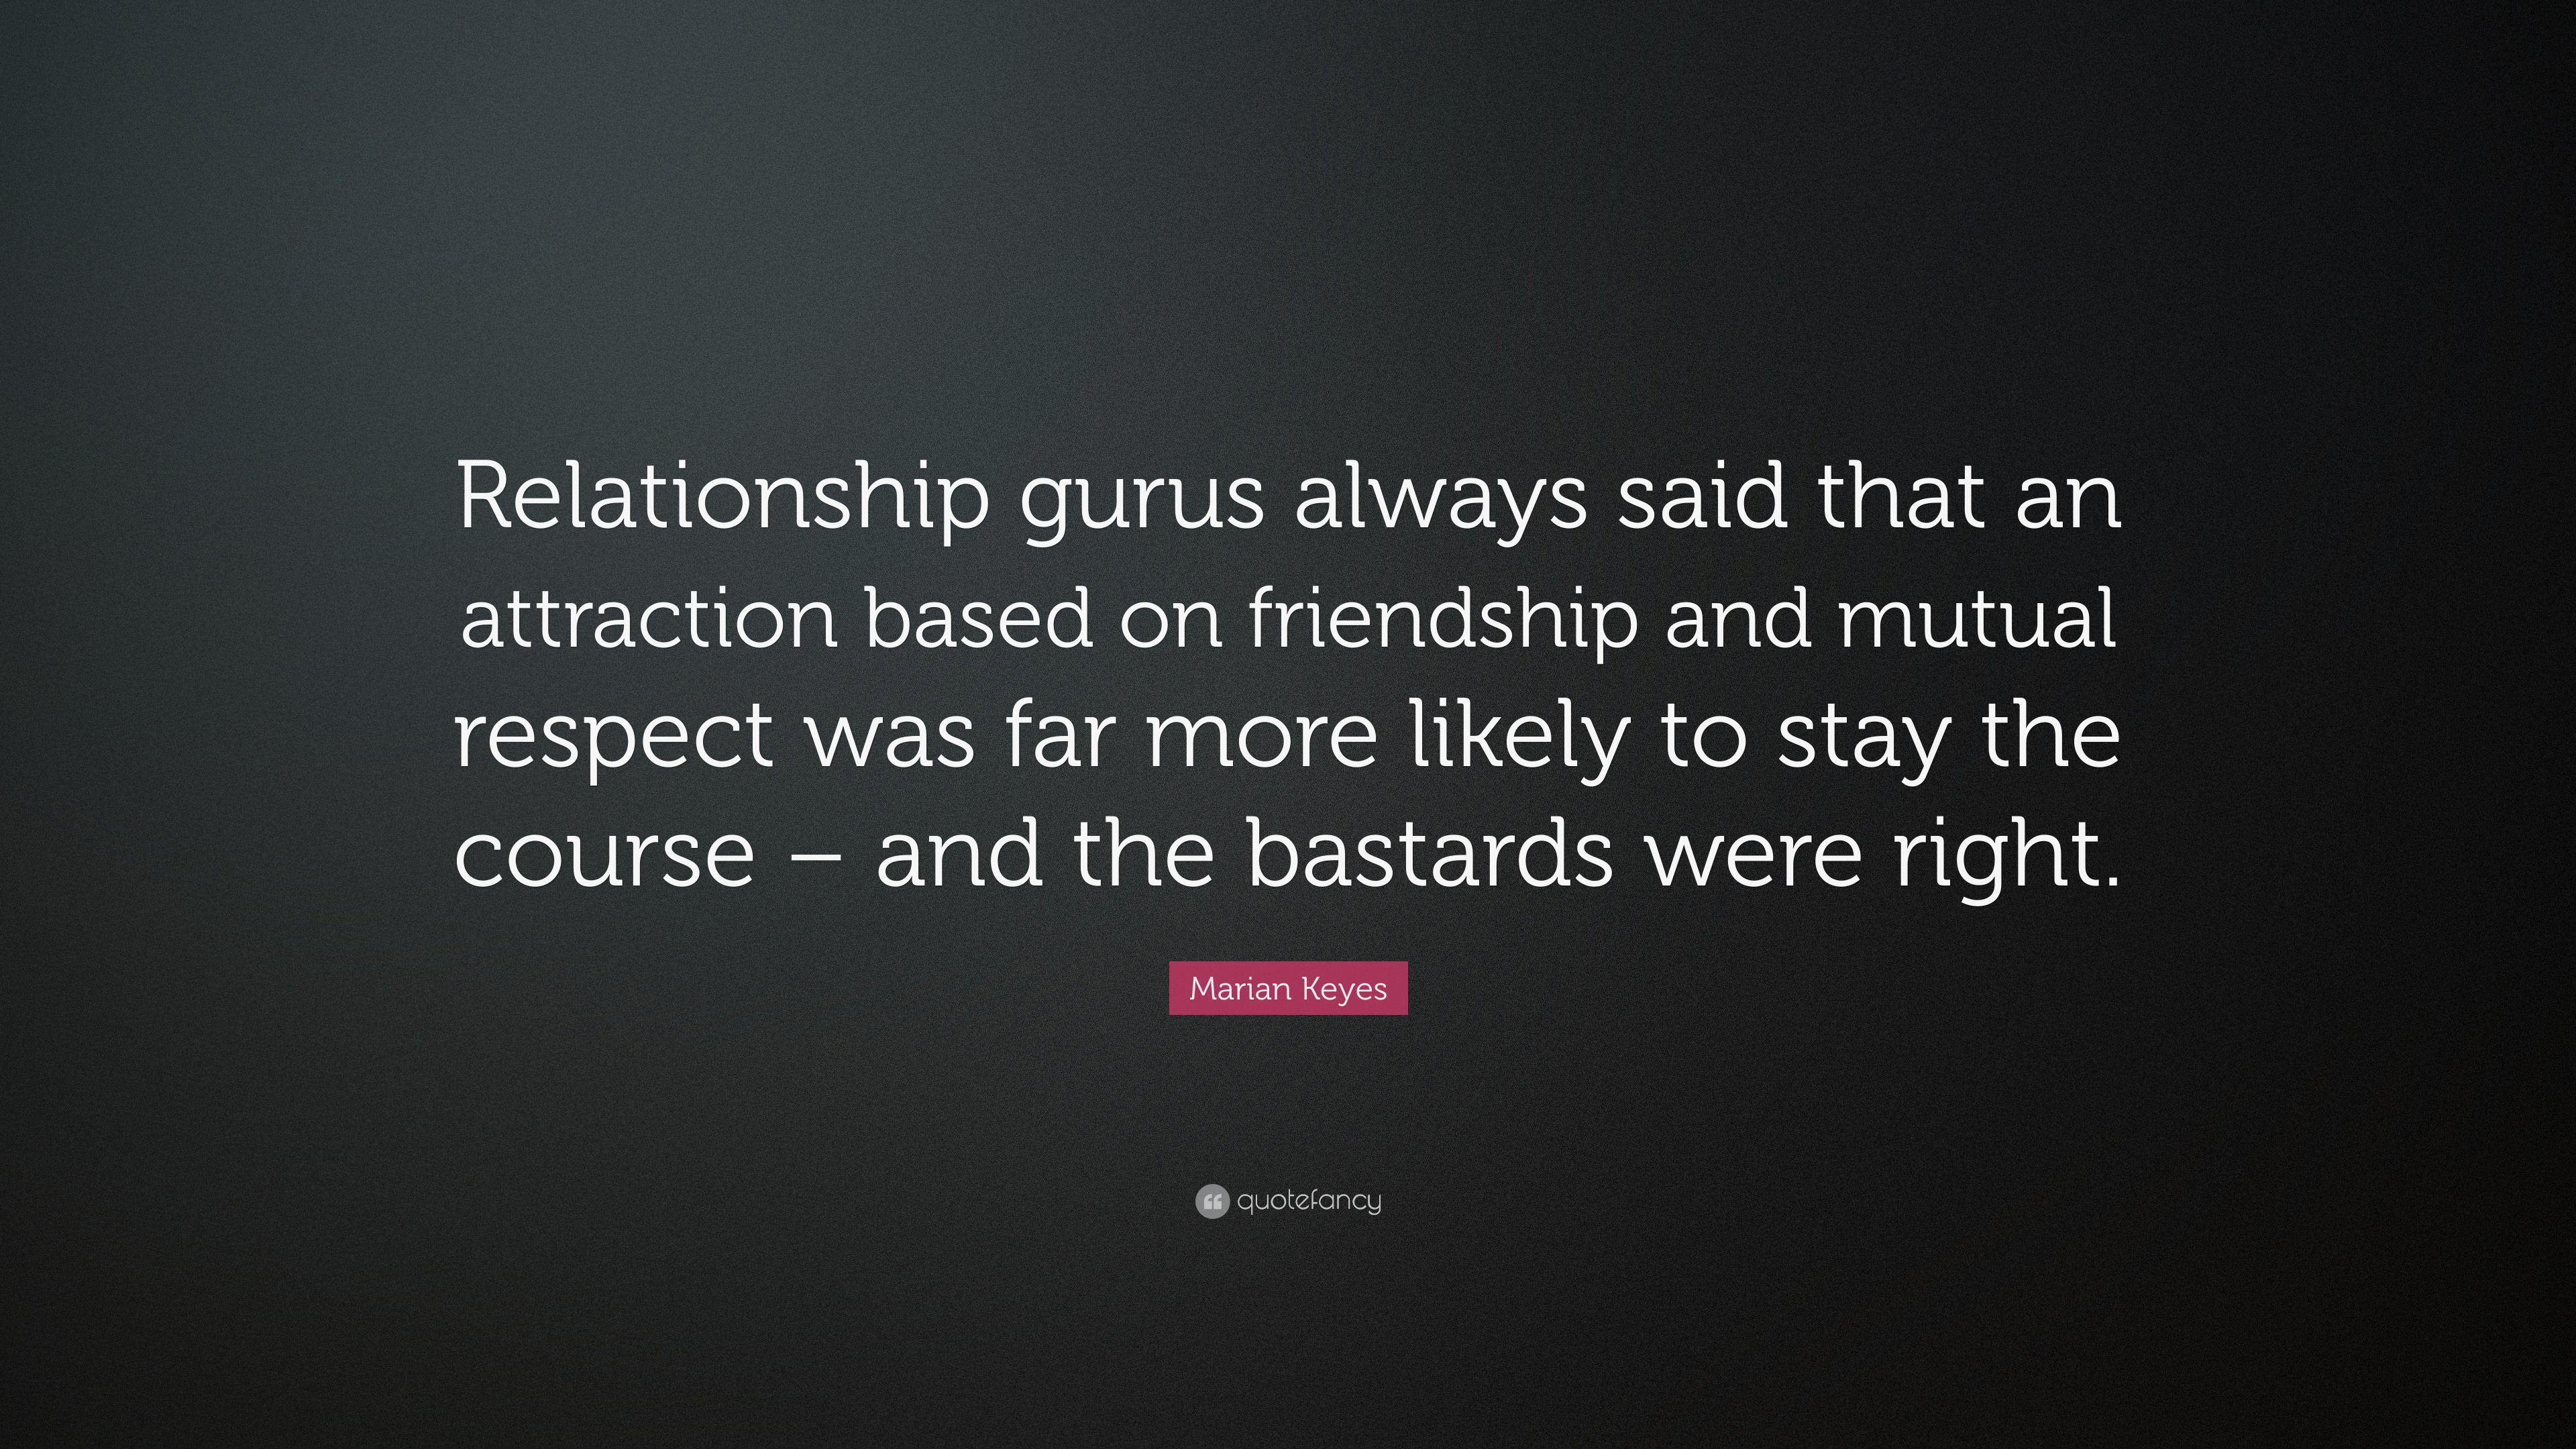 Marian Keyes Quote Relationship Gurus Always Said That An Attraction Based On Friendship And Mutual Respect Was Far More Likely To Stay The 7 Wallpapers Quotefancy